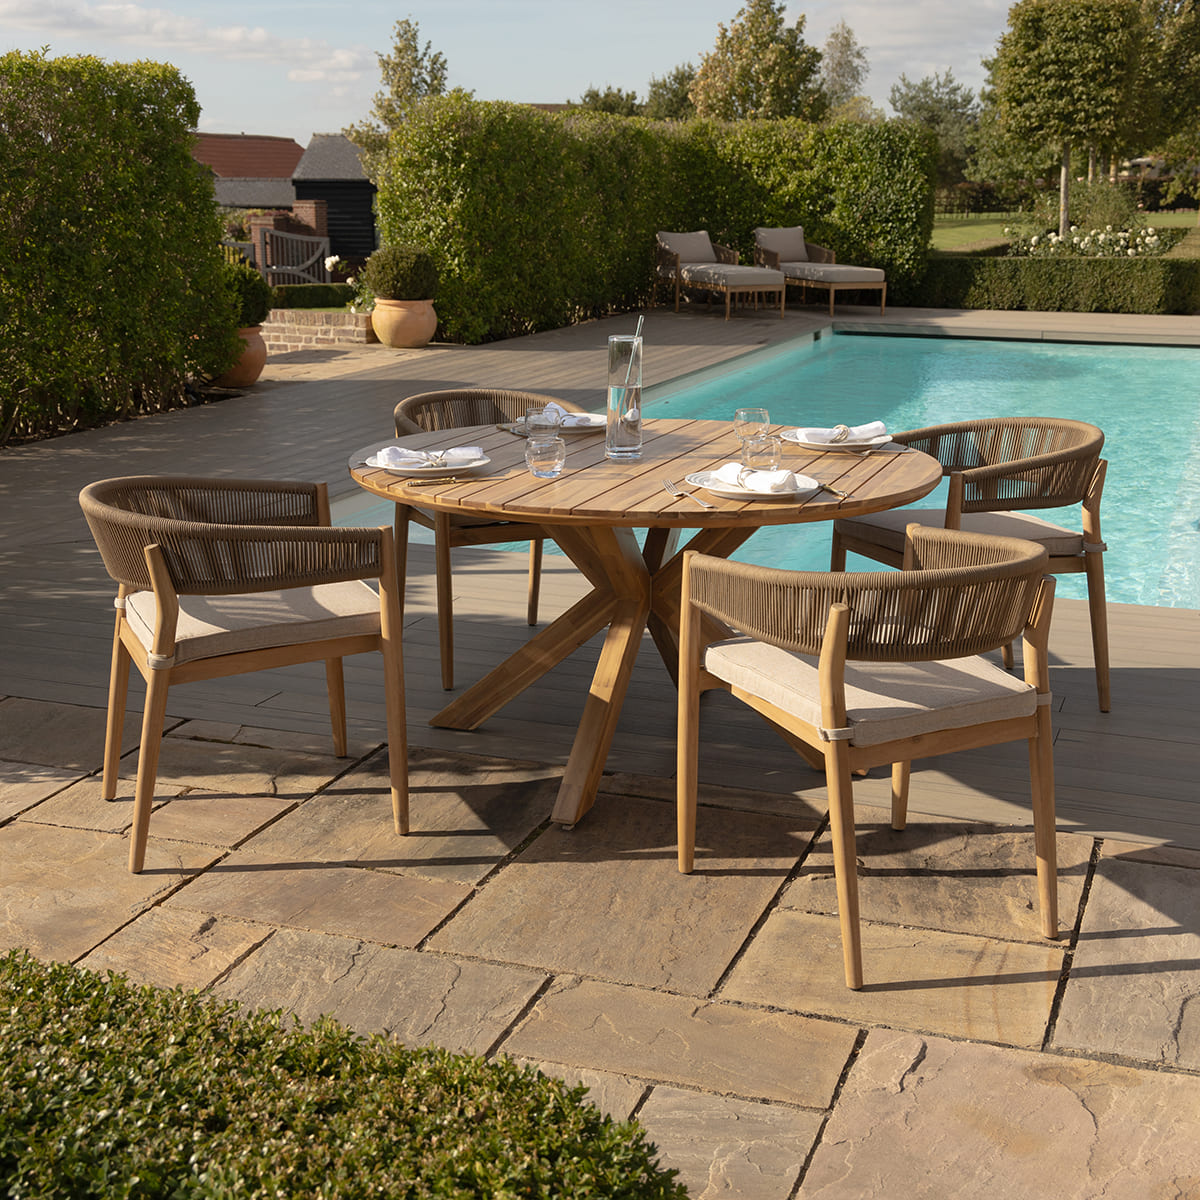 Maze Outdoor Porto Rope Weave 4 Seater Round Dining Set in Sandstone